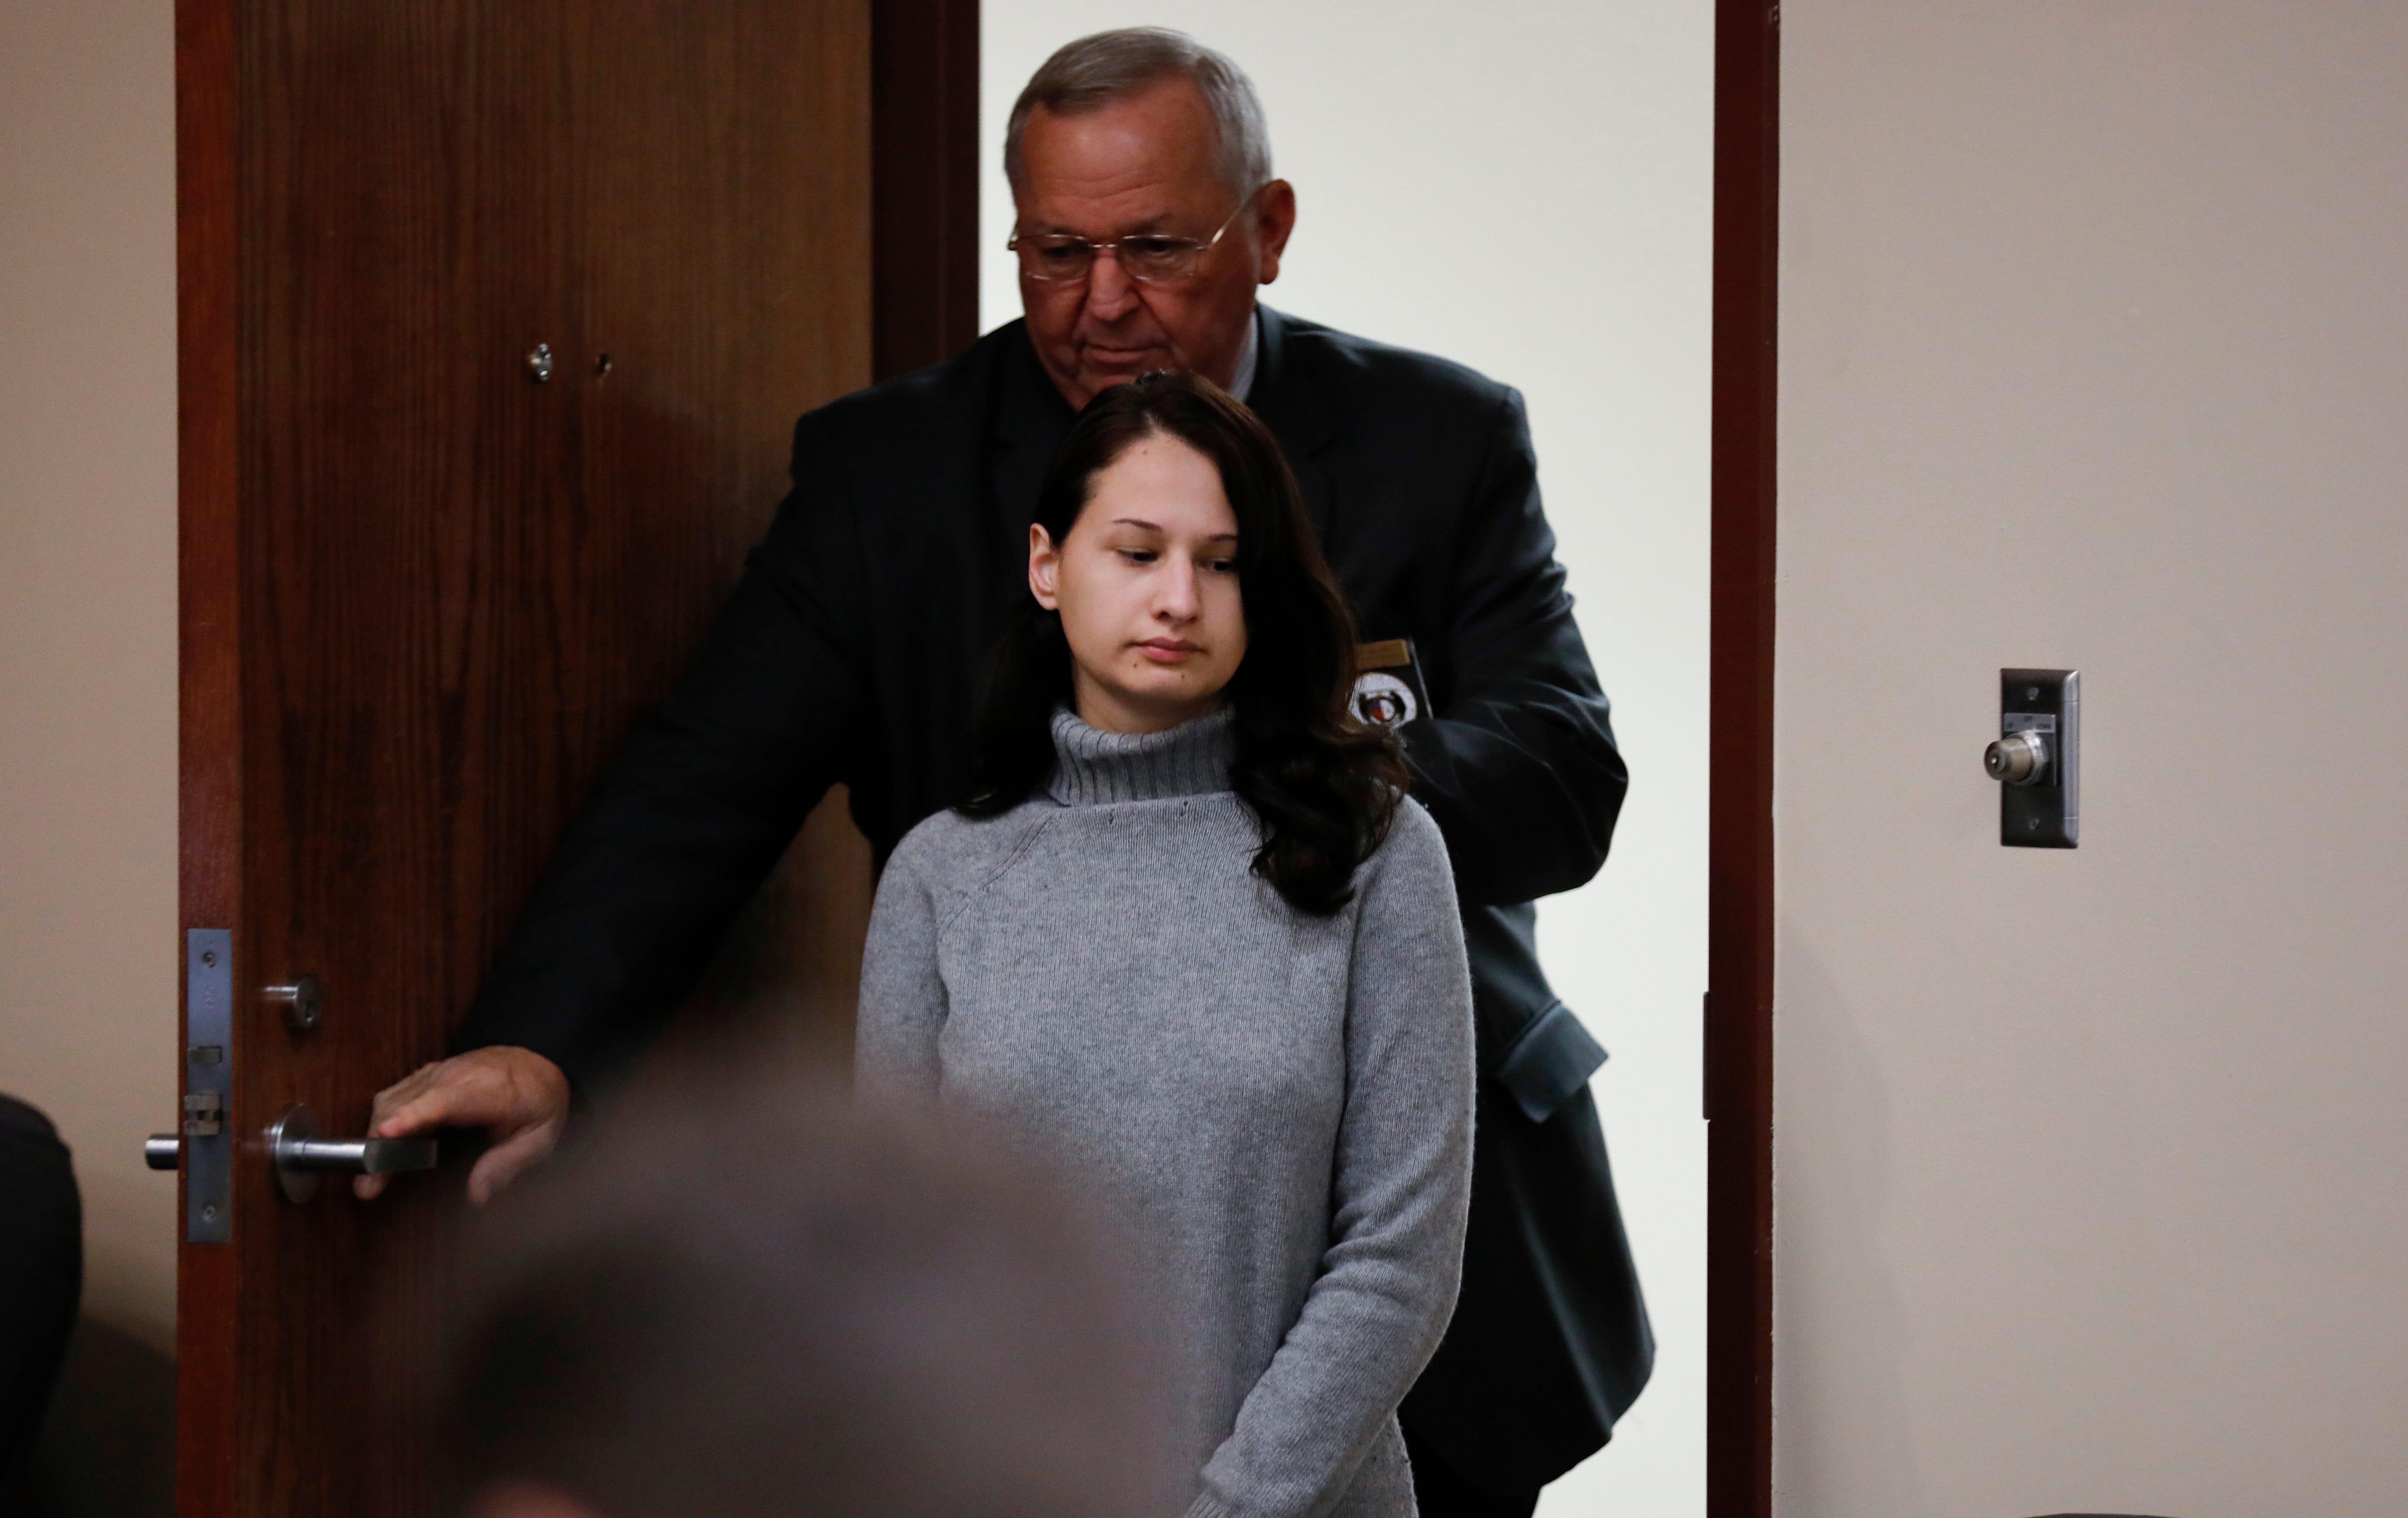 Gypsy Blanchard takes the stand during the trial of her ex-boyfriend Nicholas Godejohn on Nov. 15, 2018. Godejohn is on trial for fatally stabbing Gypsy